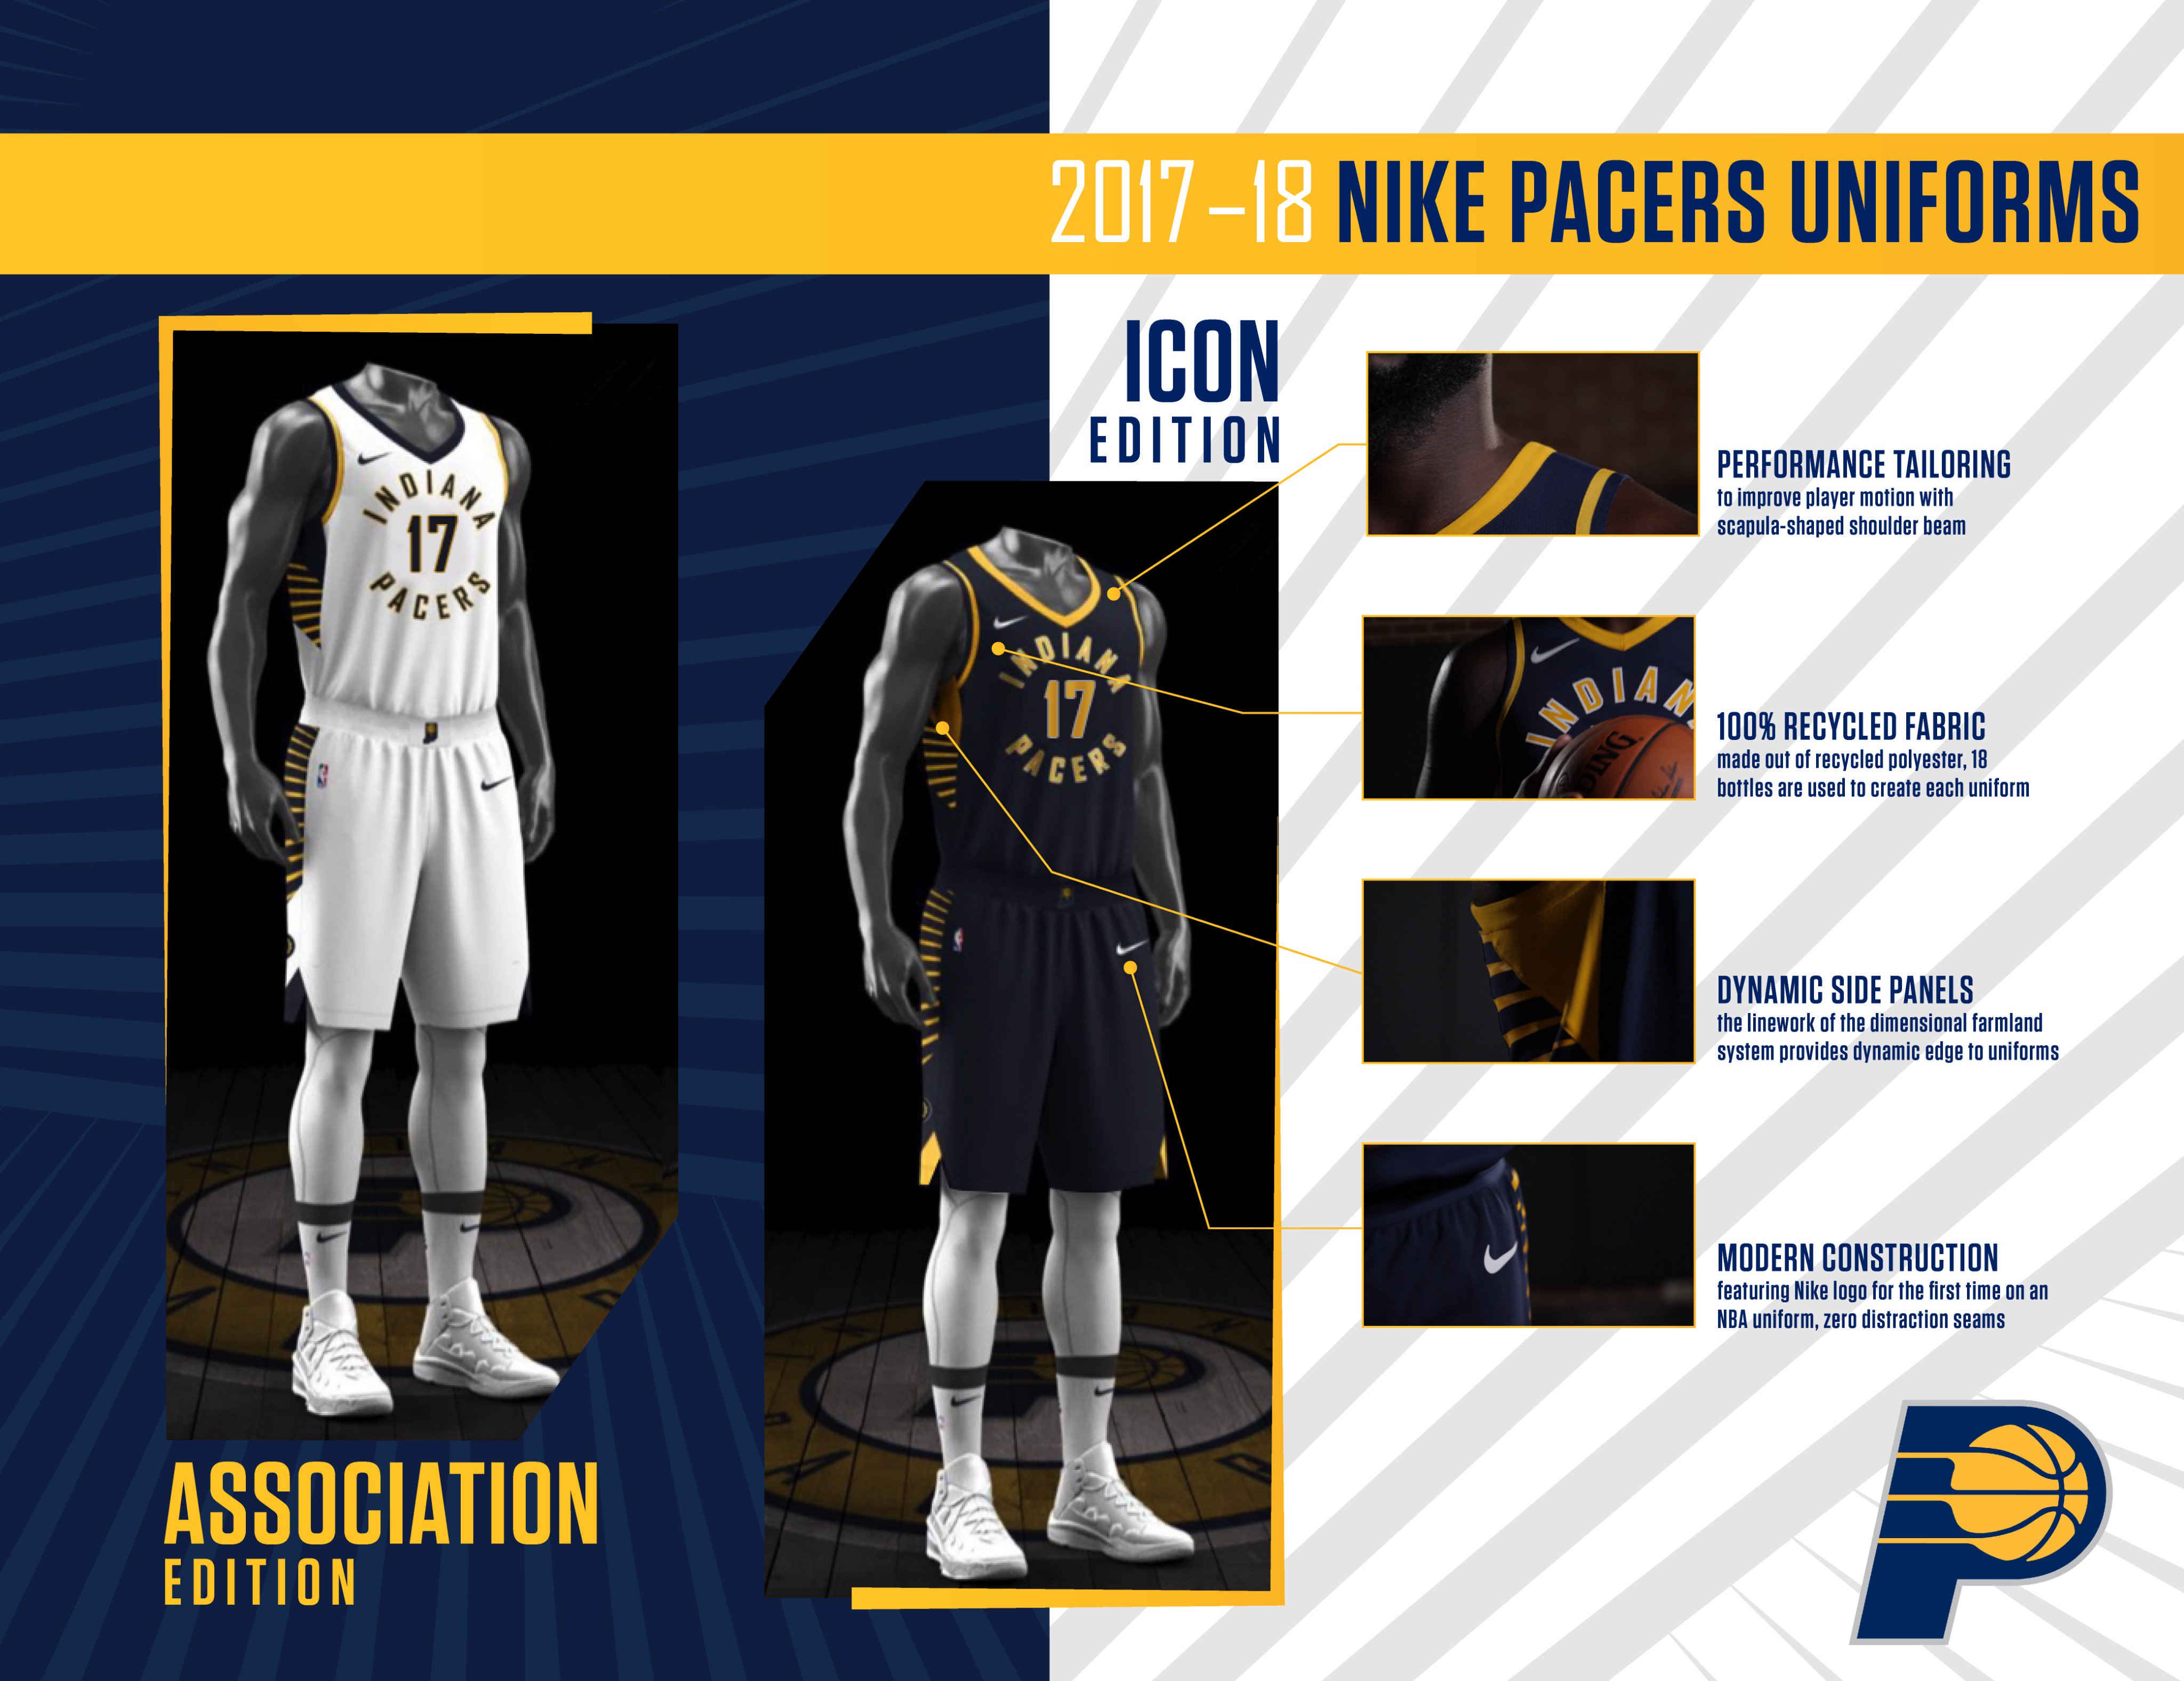 Indiana Pacers on X: Earlier this week, we unveiled our Nike